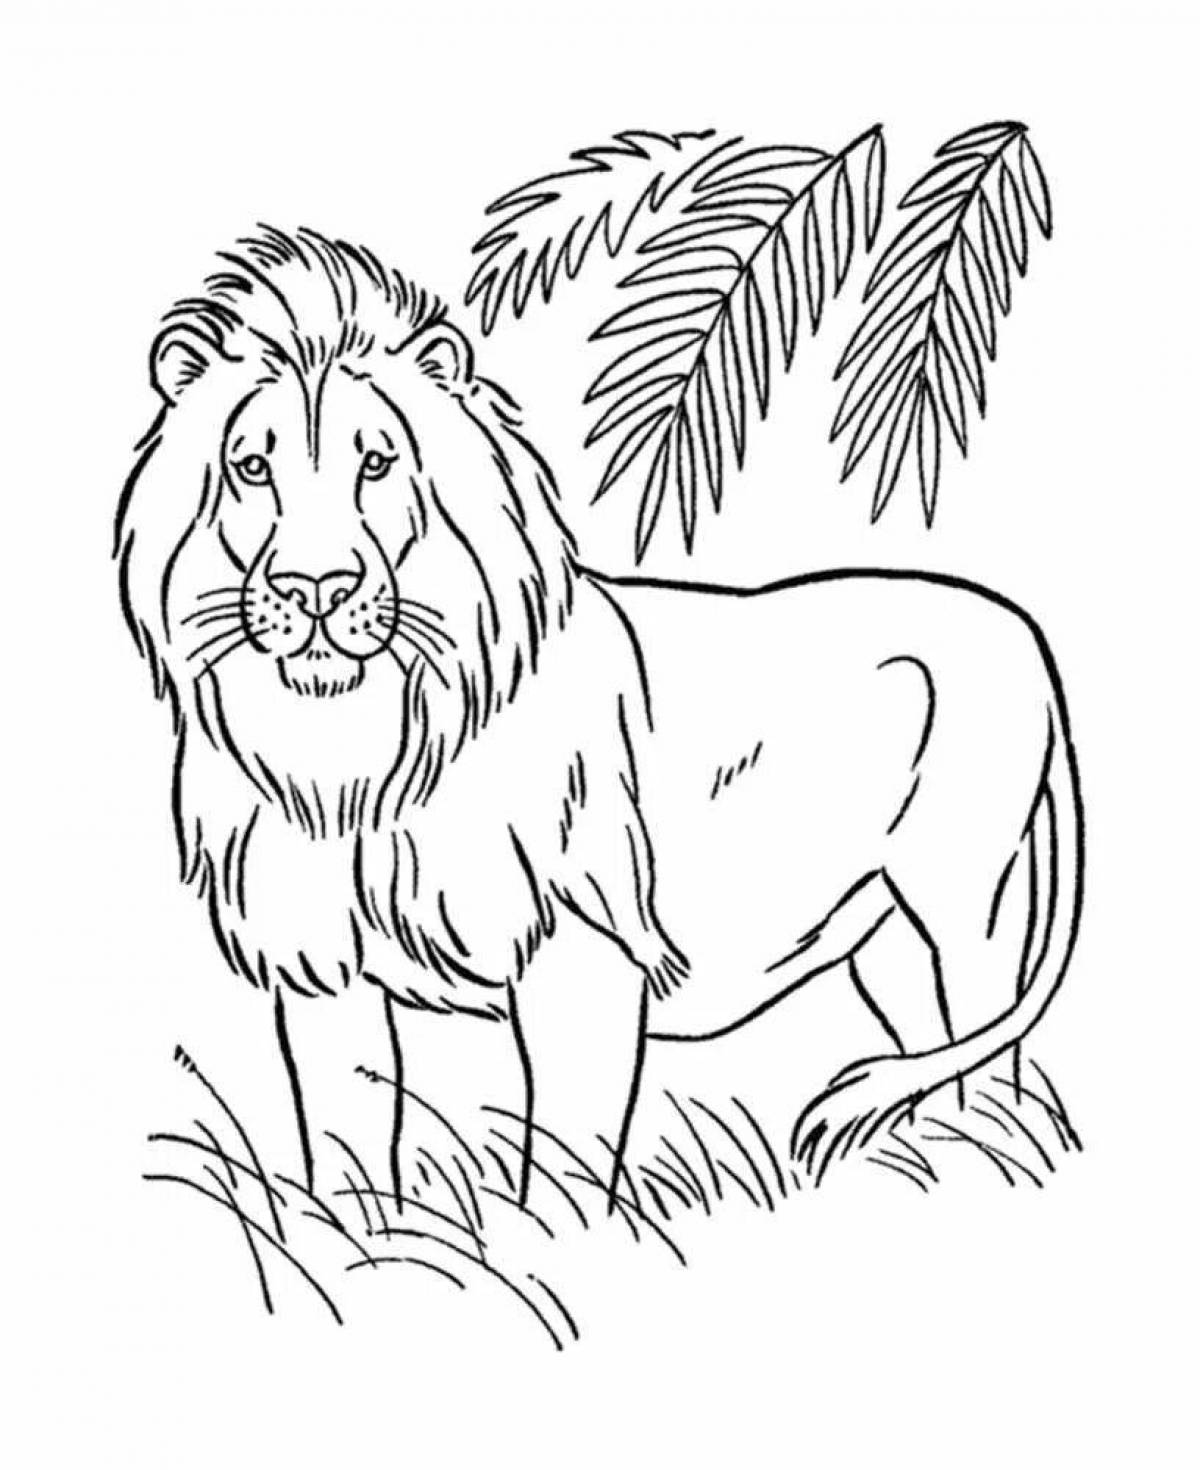 Wonderful coloring of African animals for children 3-4 years old